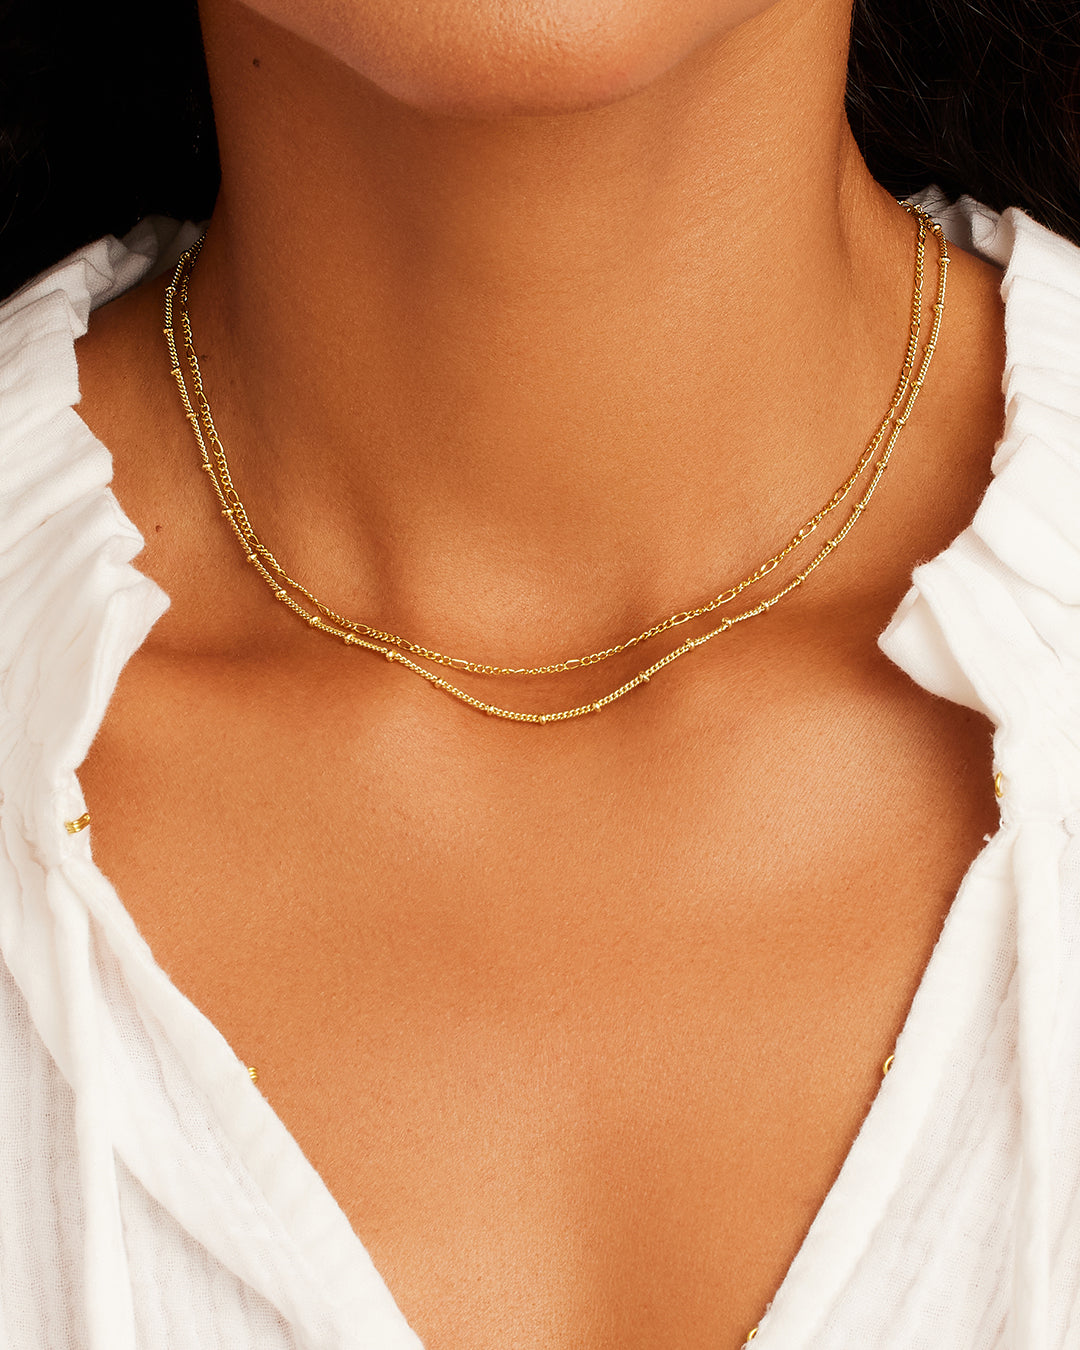 Custom 2 Layer Chain Necklace Chain Necklaces, Gold Layering Necklaces,  Layering Necklace Set, Chain Choker, Choker Necklace GFN00009 -  Sweden